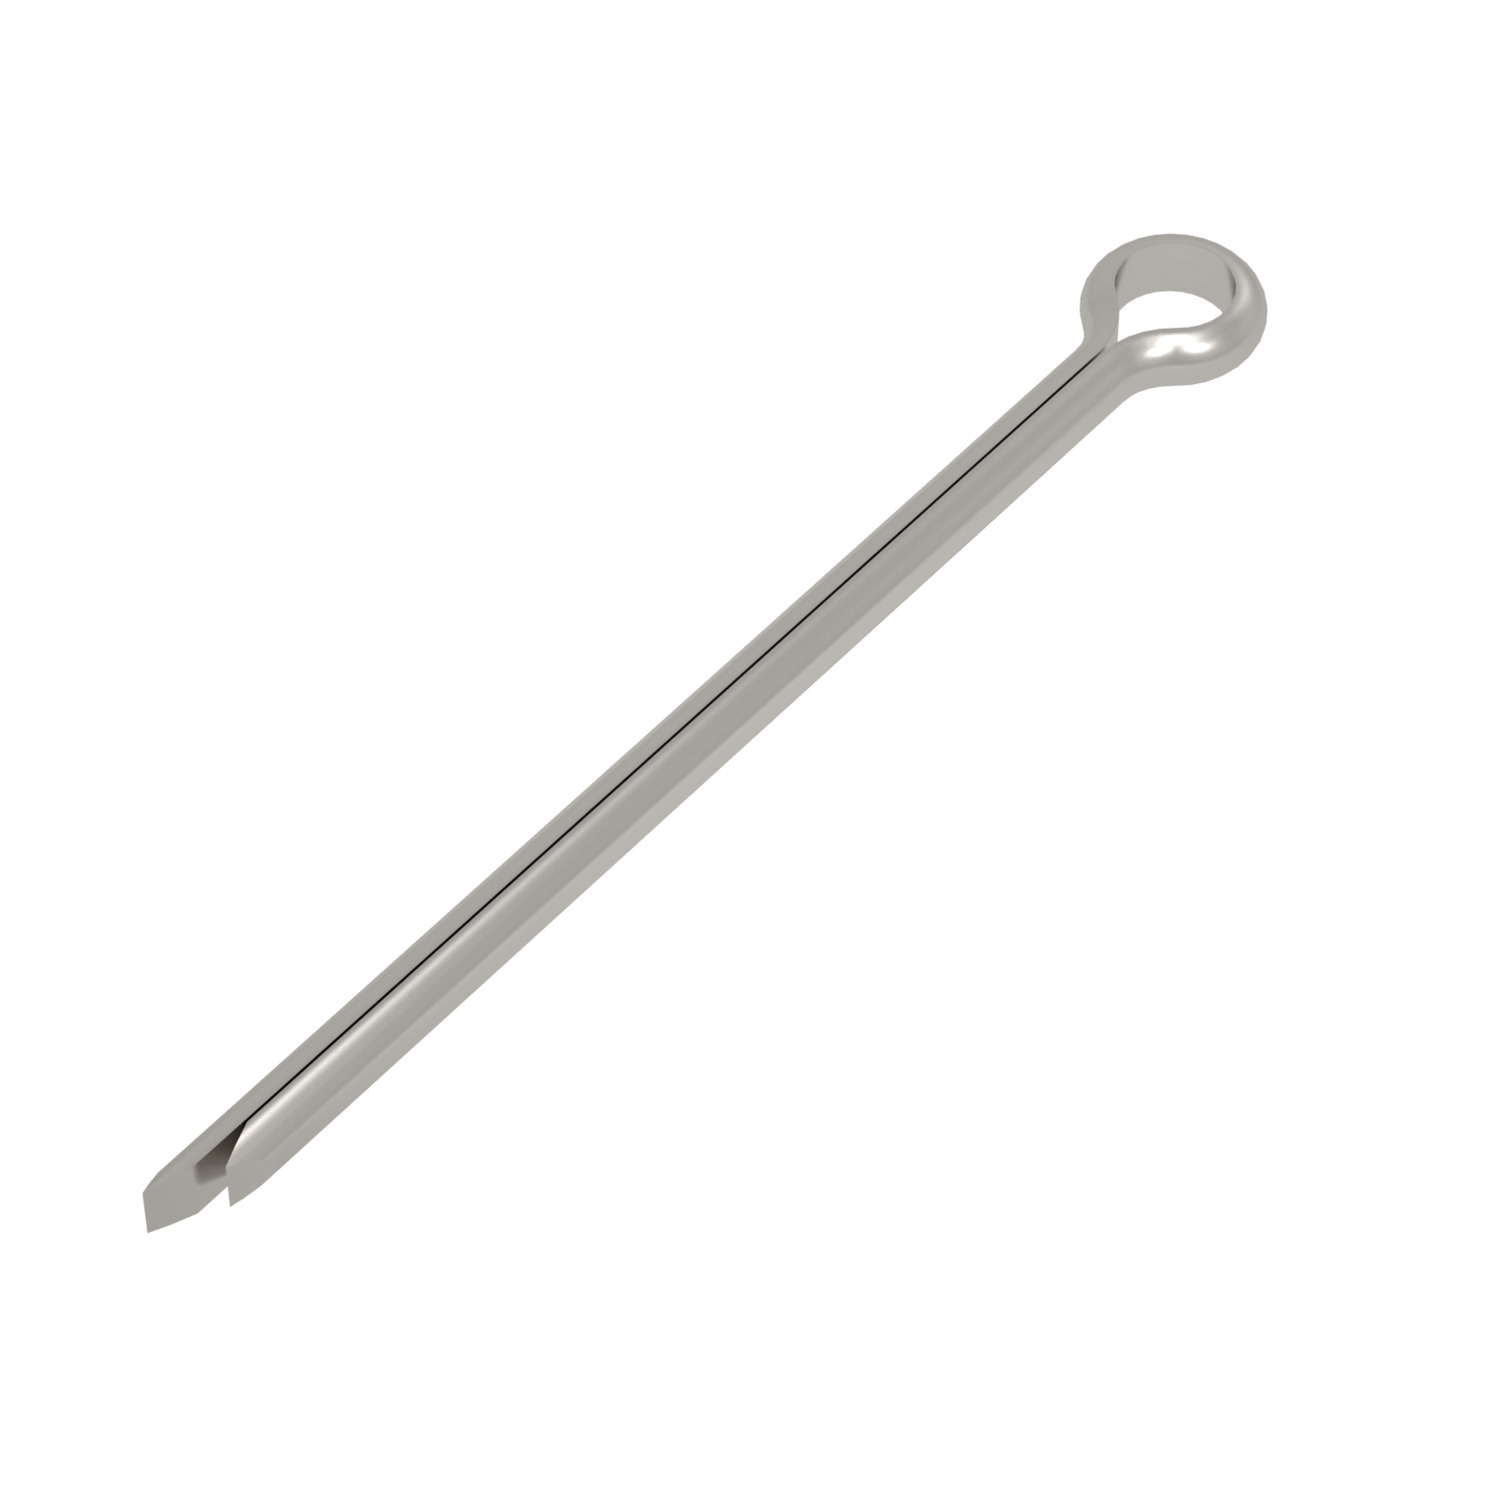 65675.W1018 Stainless Cotter Pin 1.6 - 18 - 1,3 - 1.4